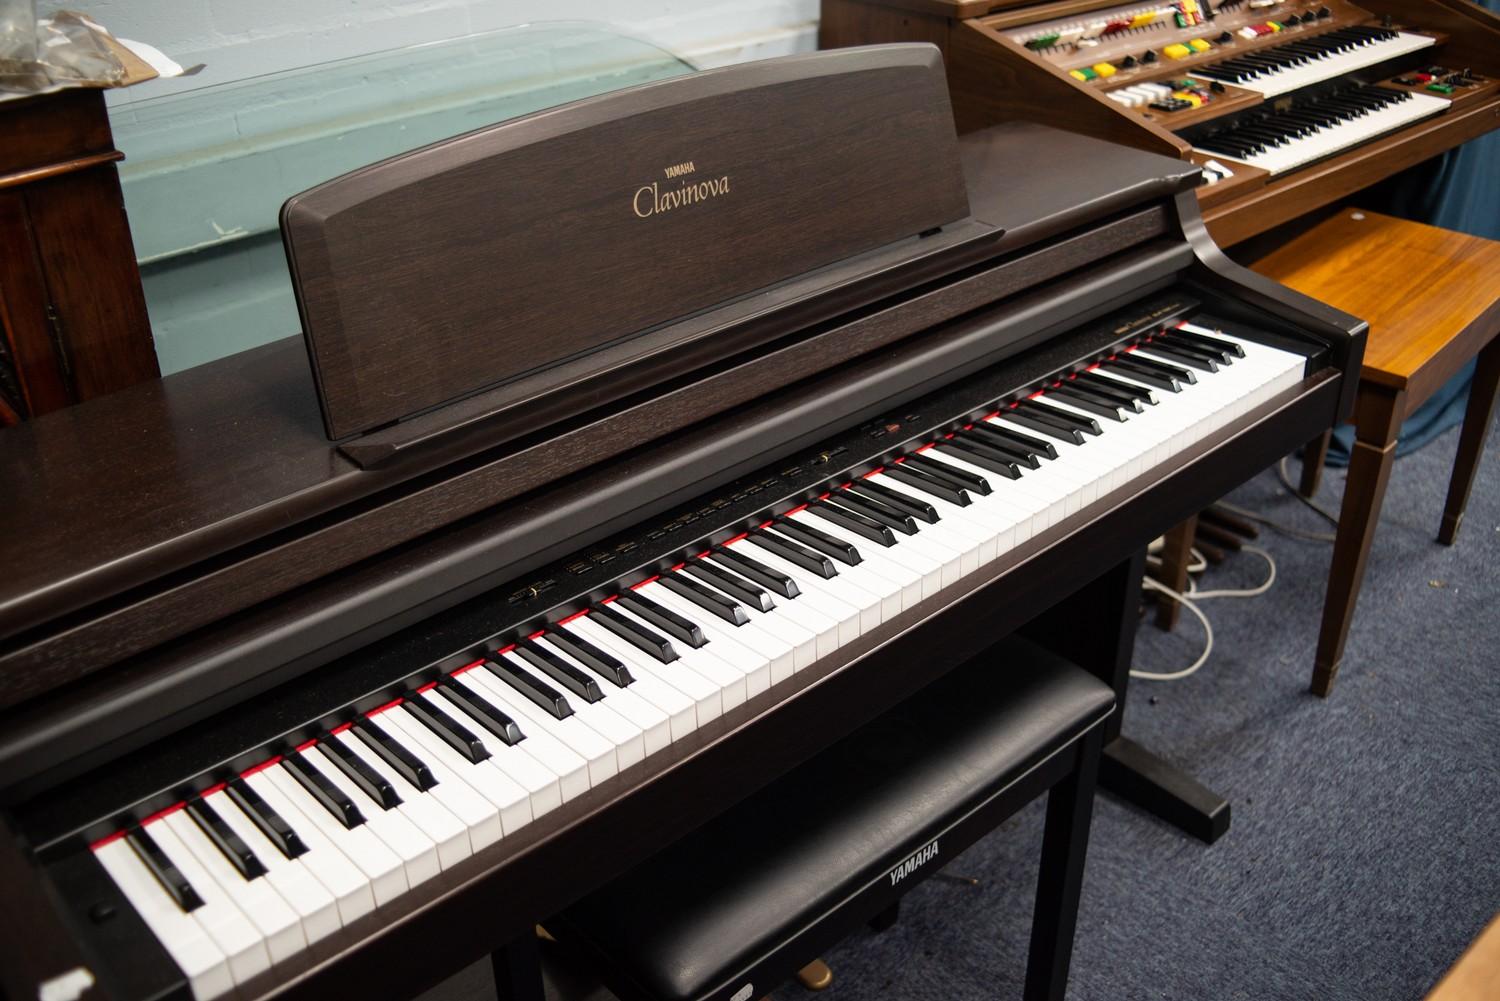 YAMAHA 'CLAVINOVA' SEVEN OCTAVE KEYBOARD, MODEL CLF-155 STEREO WITH METRONOME AND REVERB MULTI-MID - Image 3 of 7